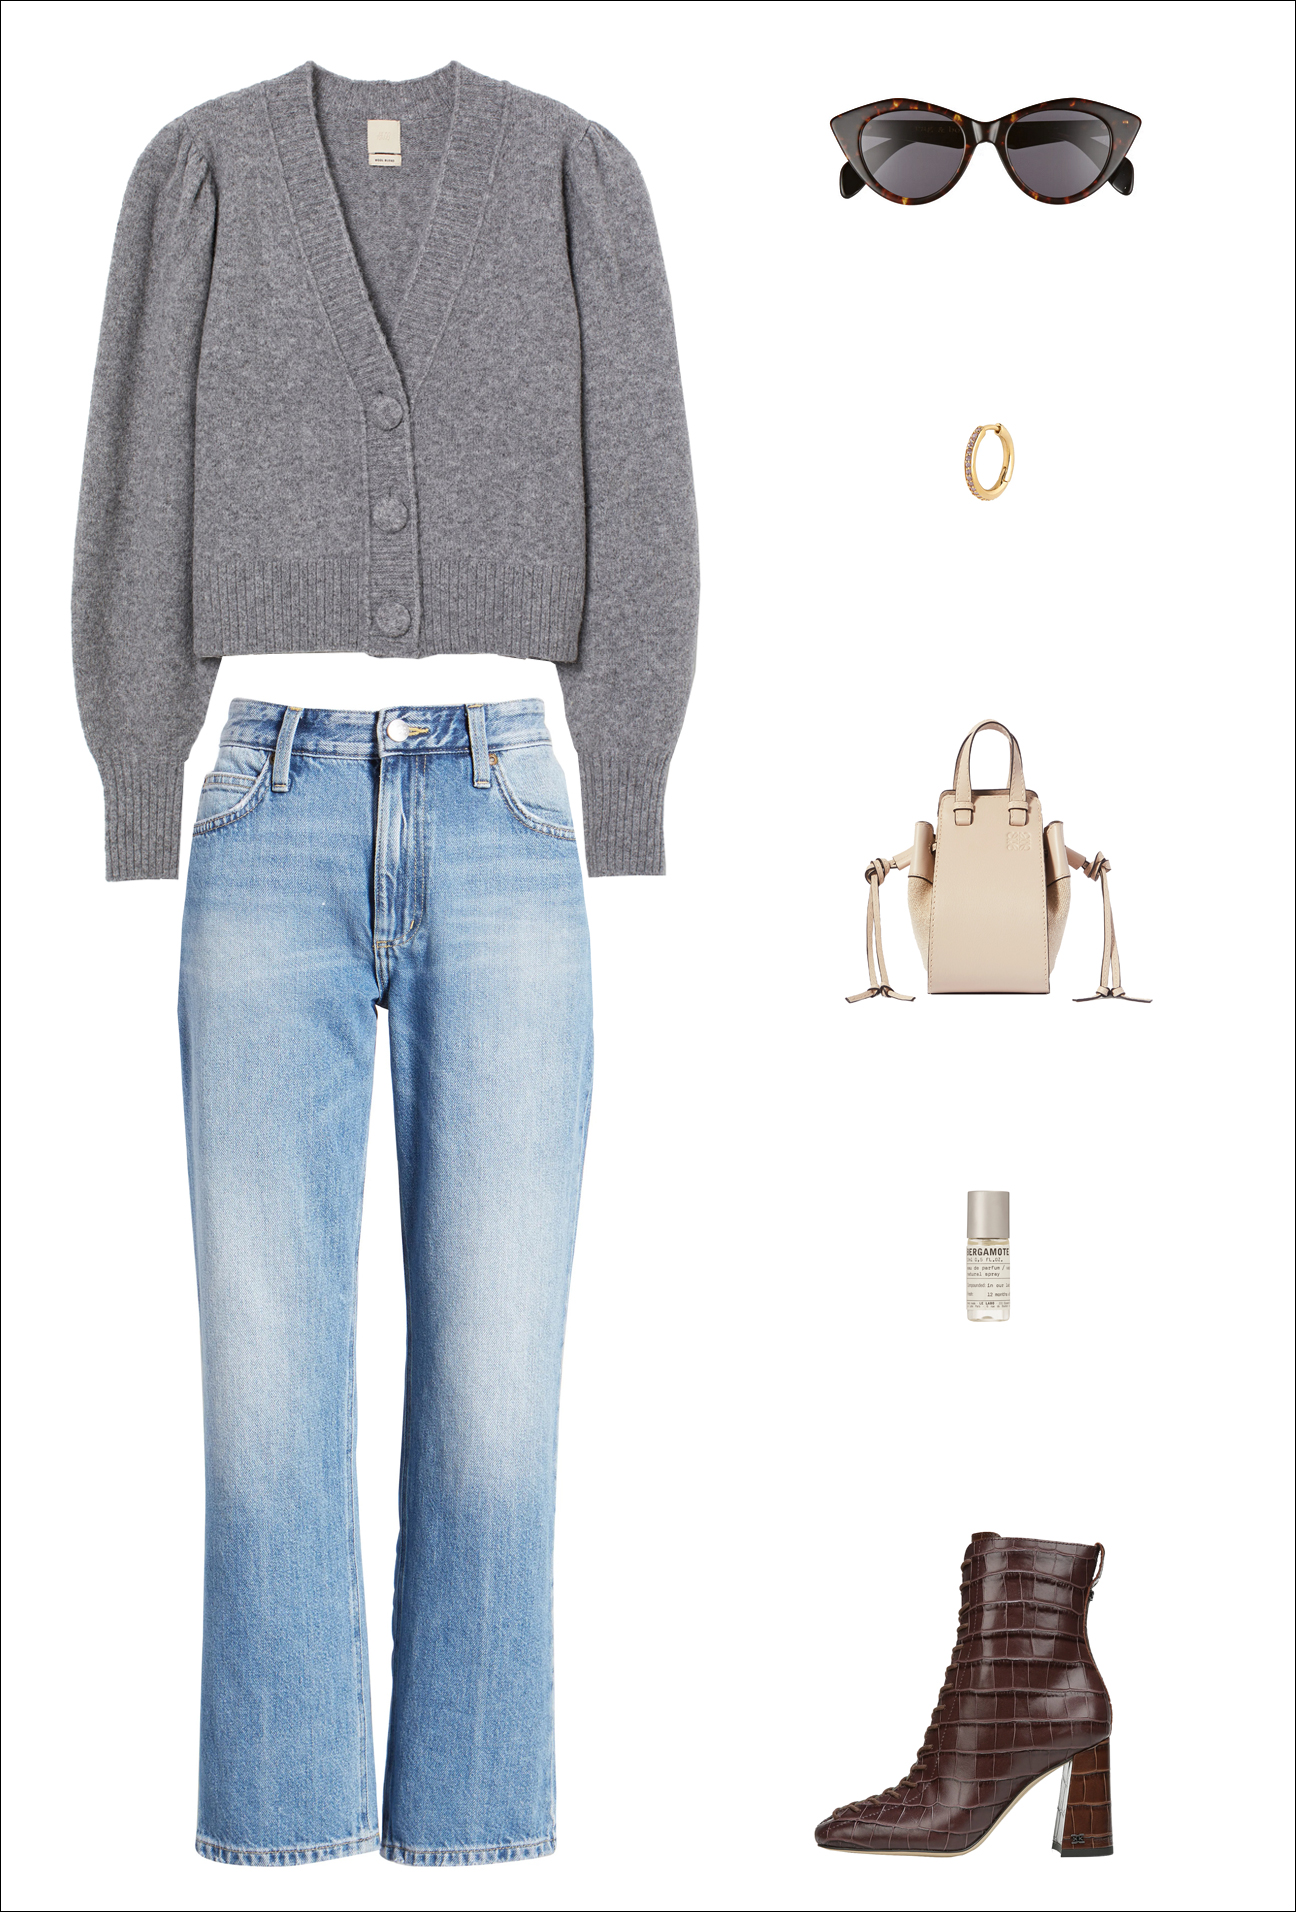 A Cool Denim Outfit Idea to Wear This Fall